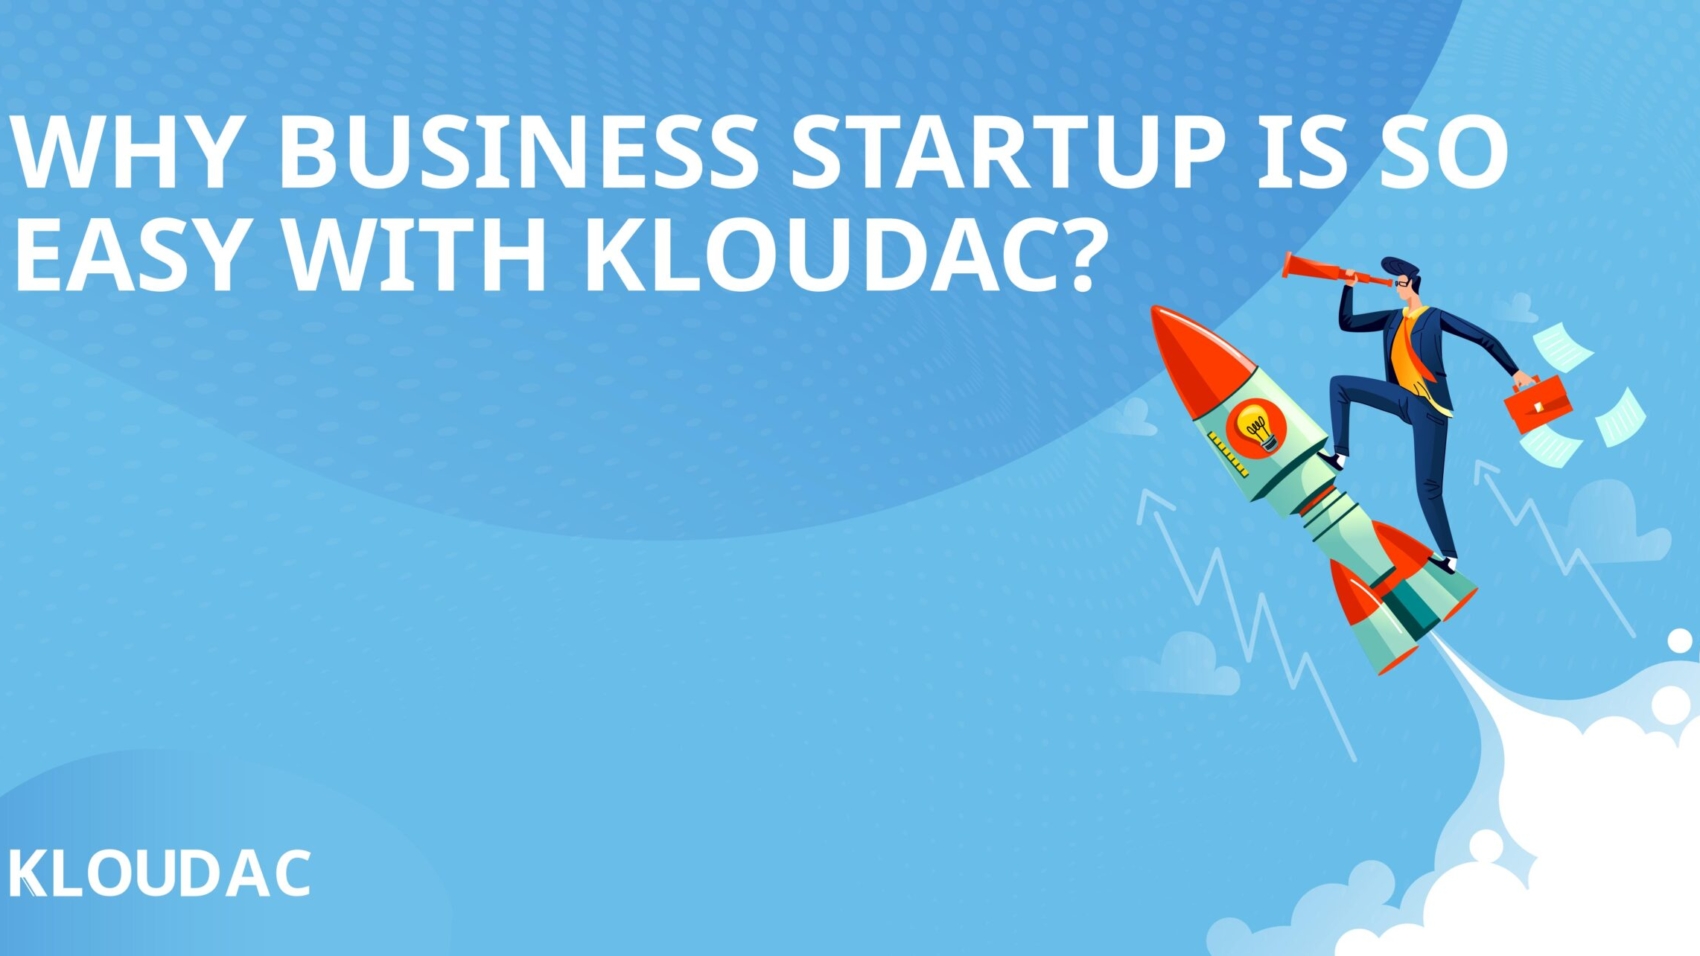 Why Business Startup is so easy with KLOUDAC?